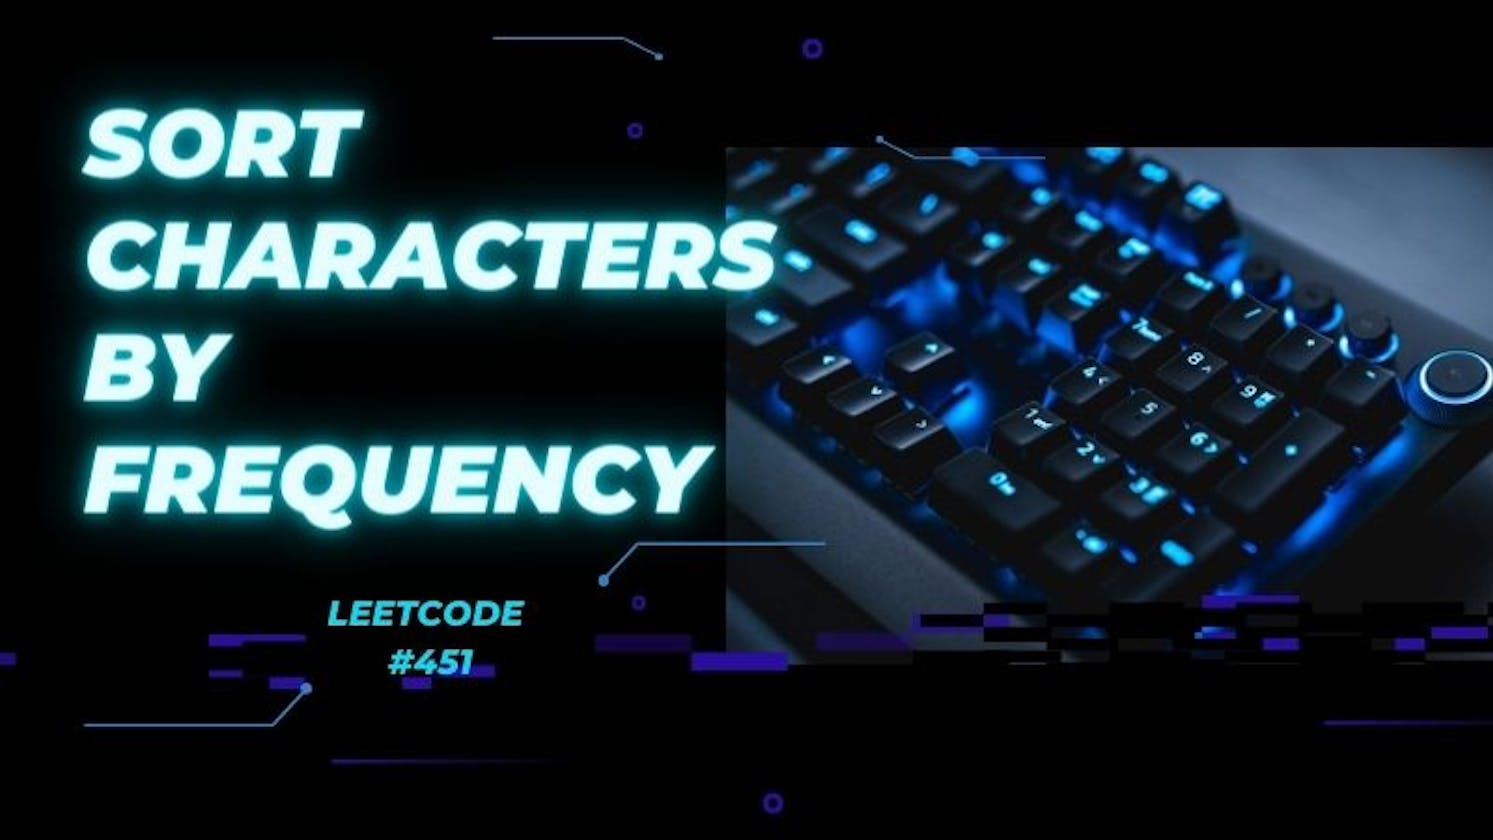 Sort Characters By Frequency - Leetcode #451